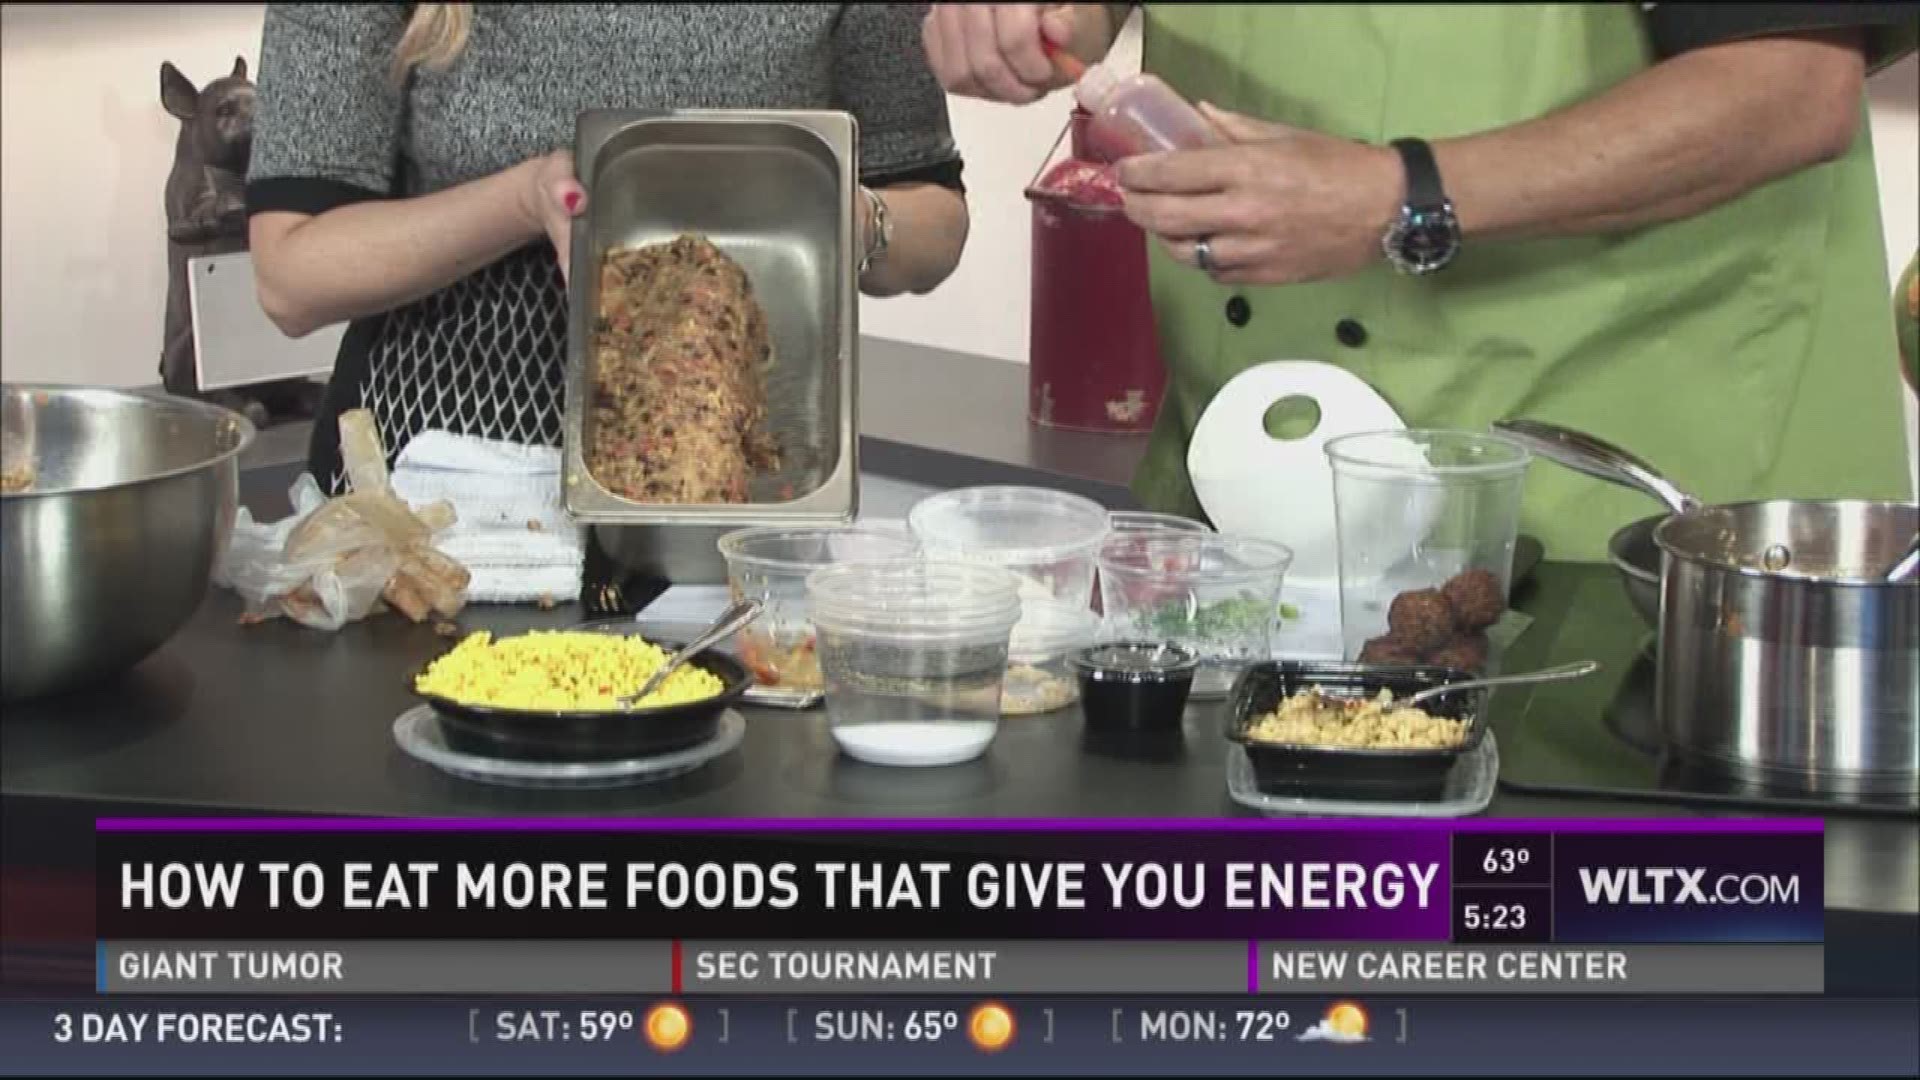 Chef Keith Campbell from Raid My Pantry shows how to make some dishes that will give you energy.